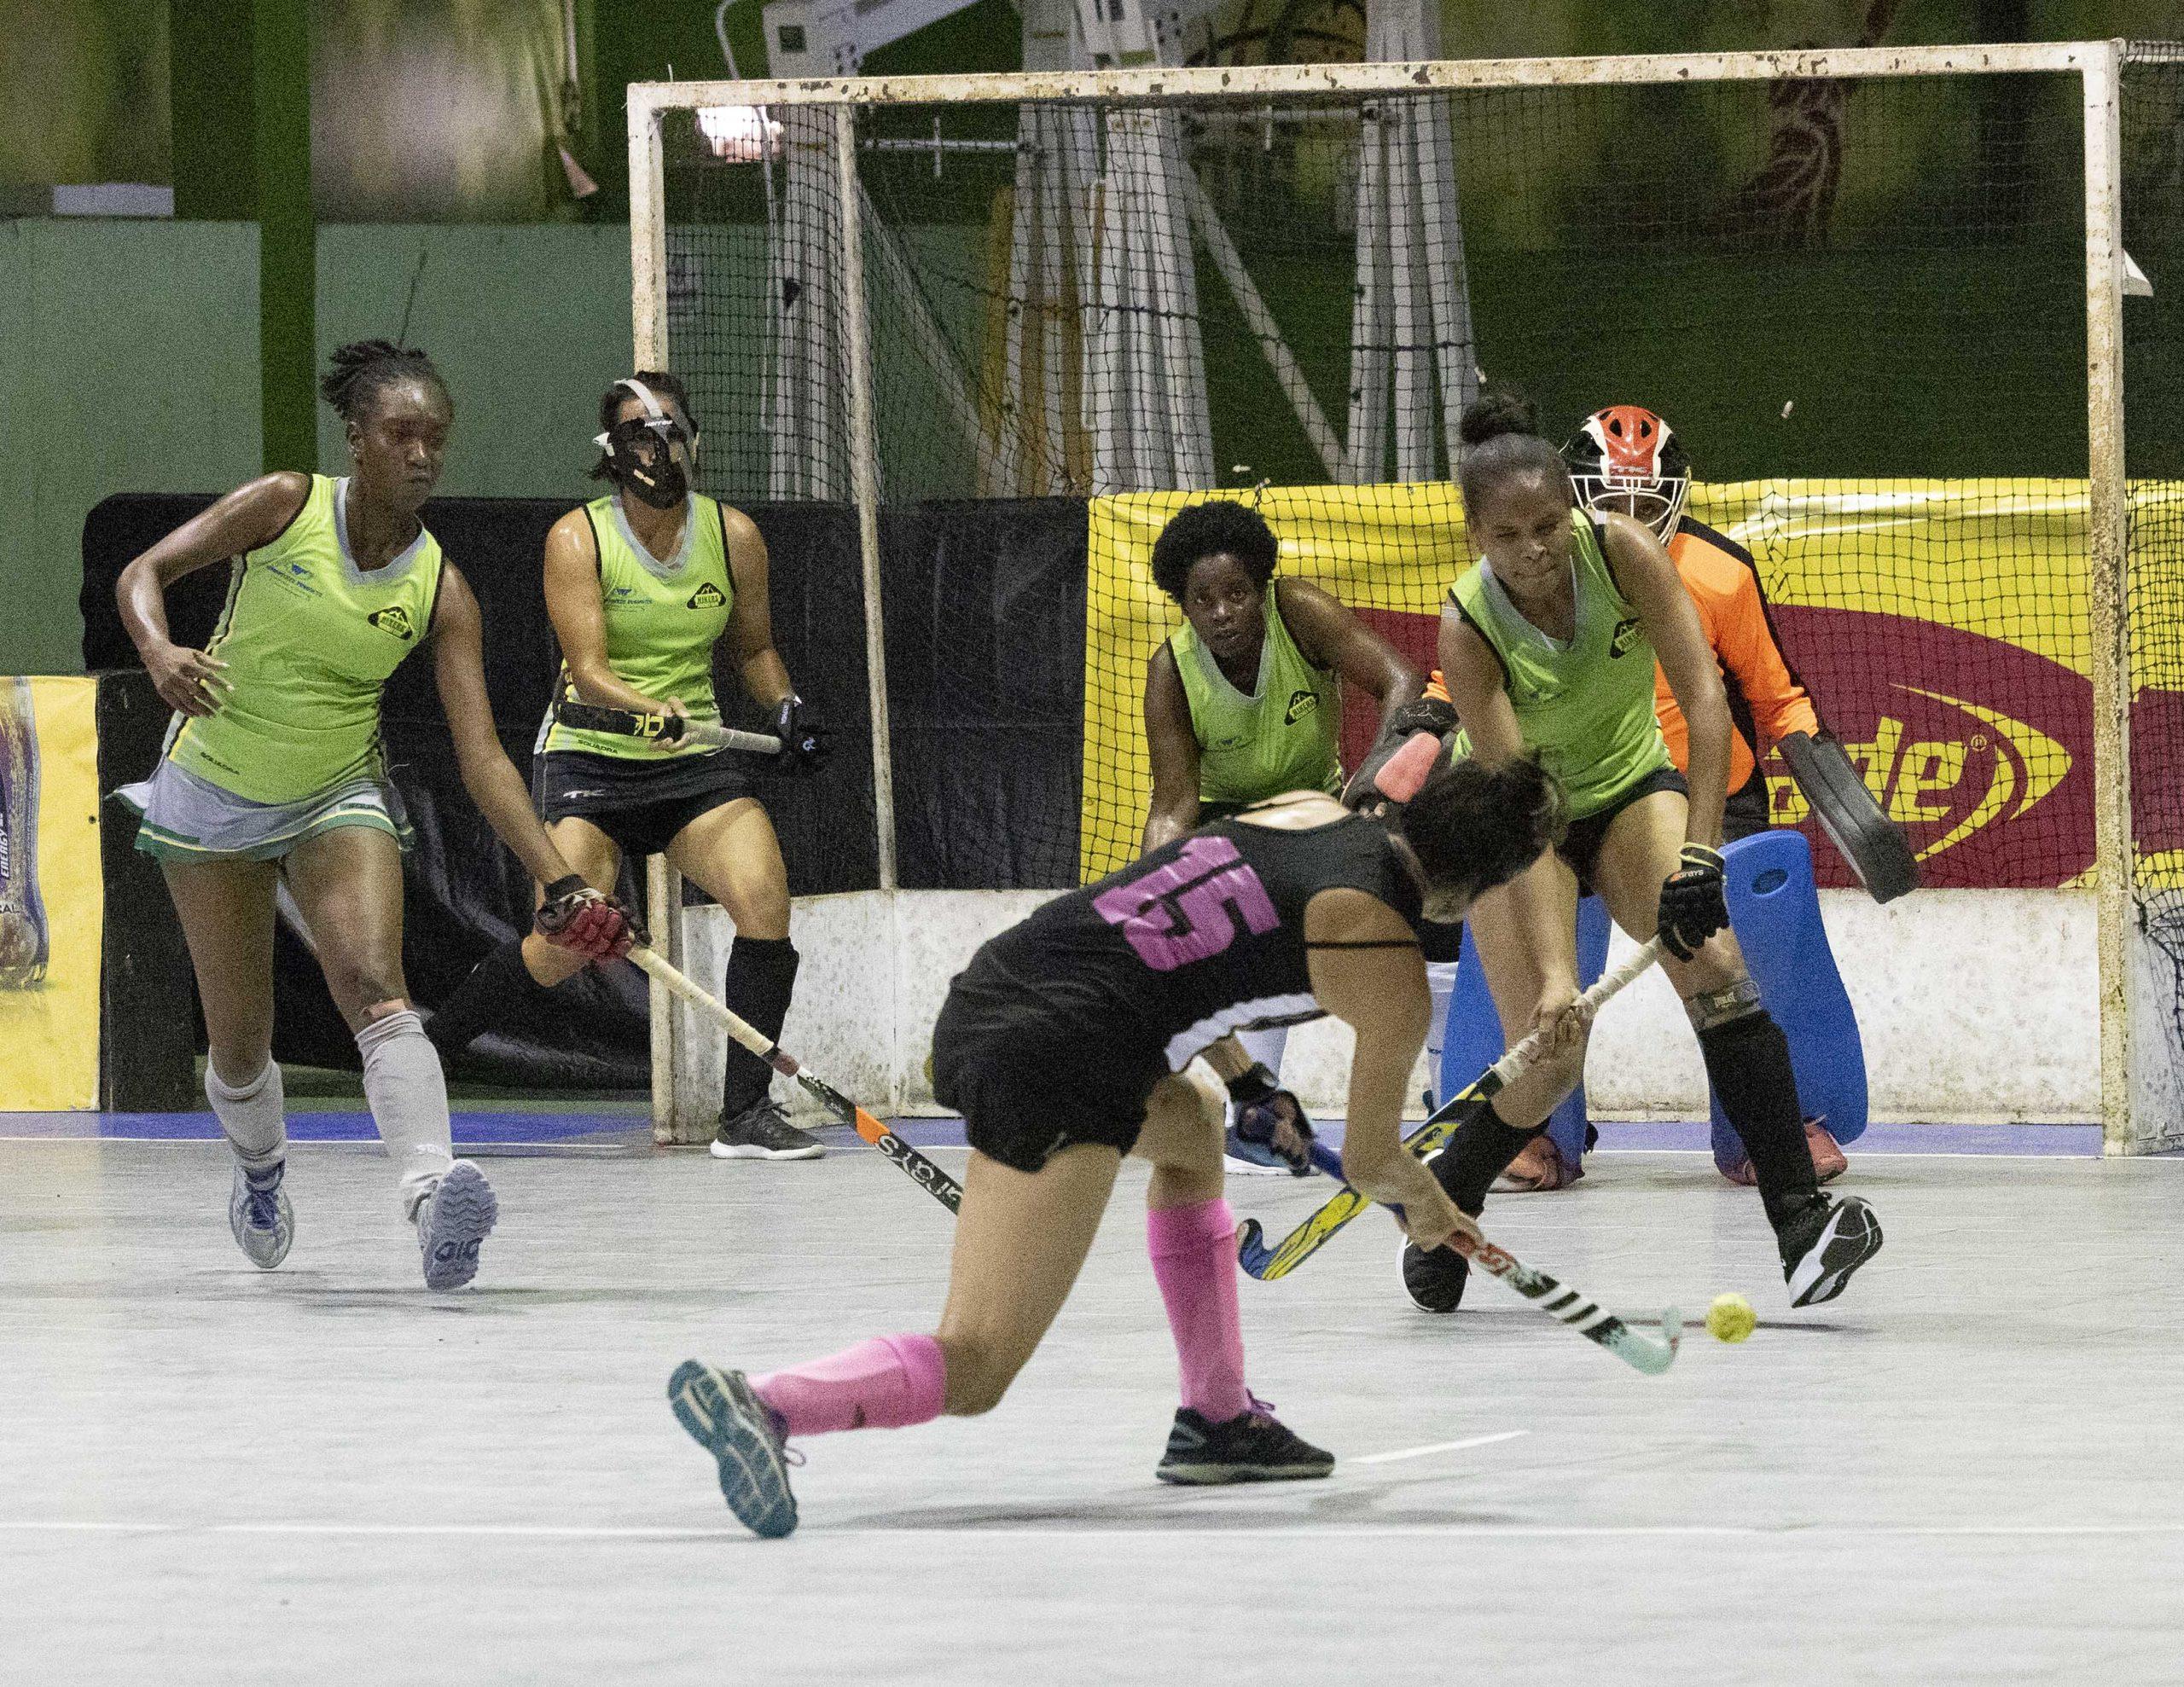 Lucozade Indoor Hockey finals on tonight at the CASH